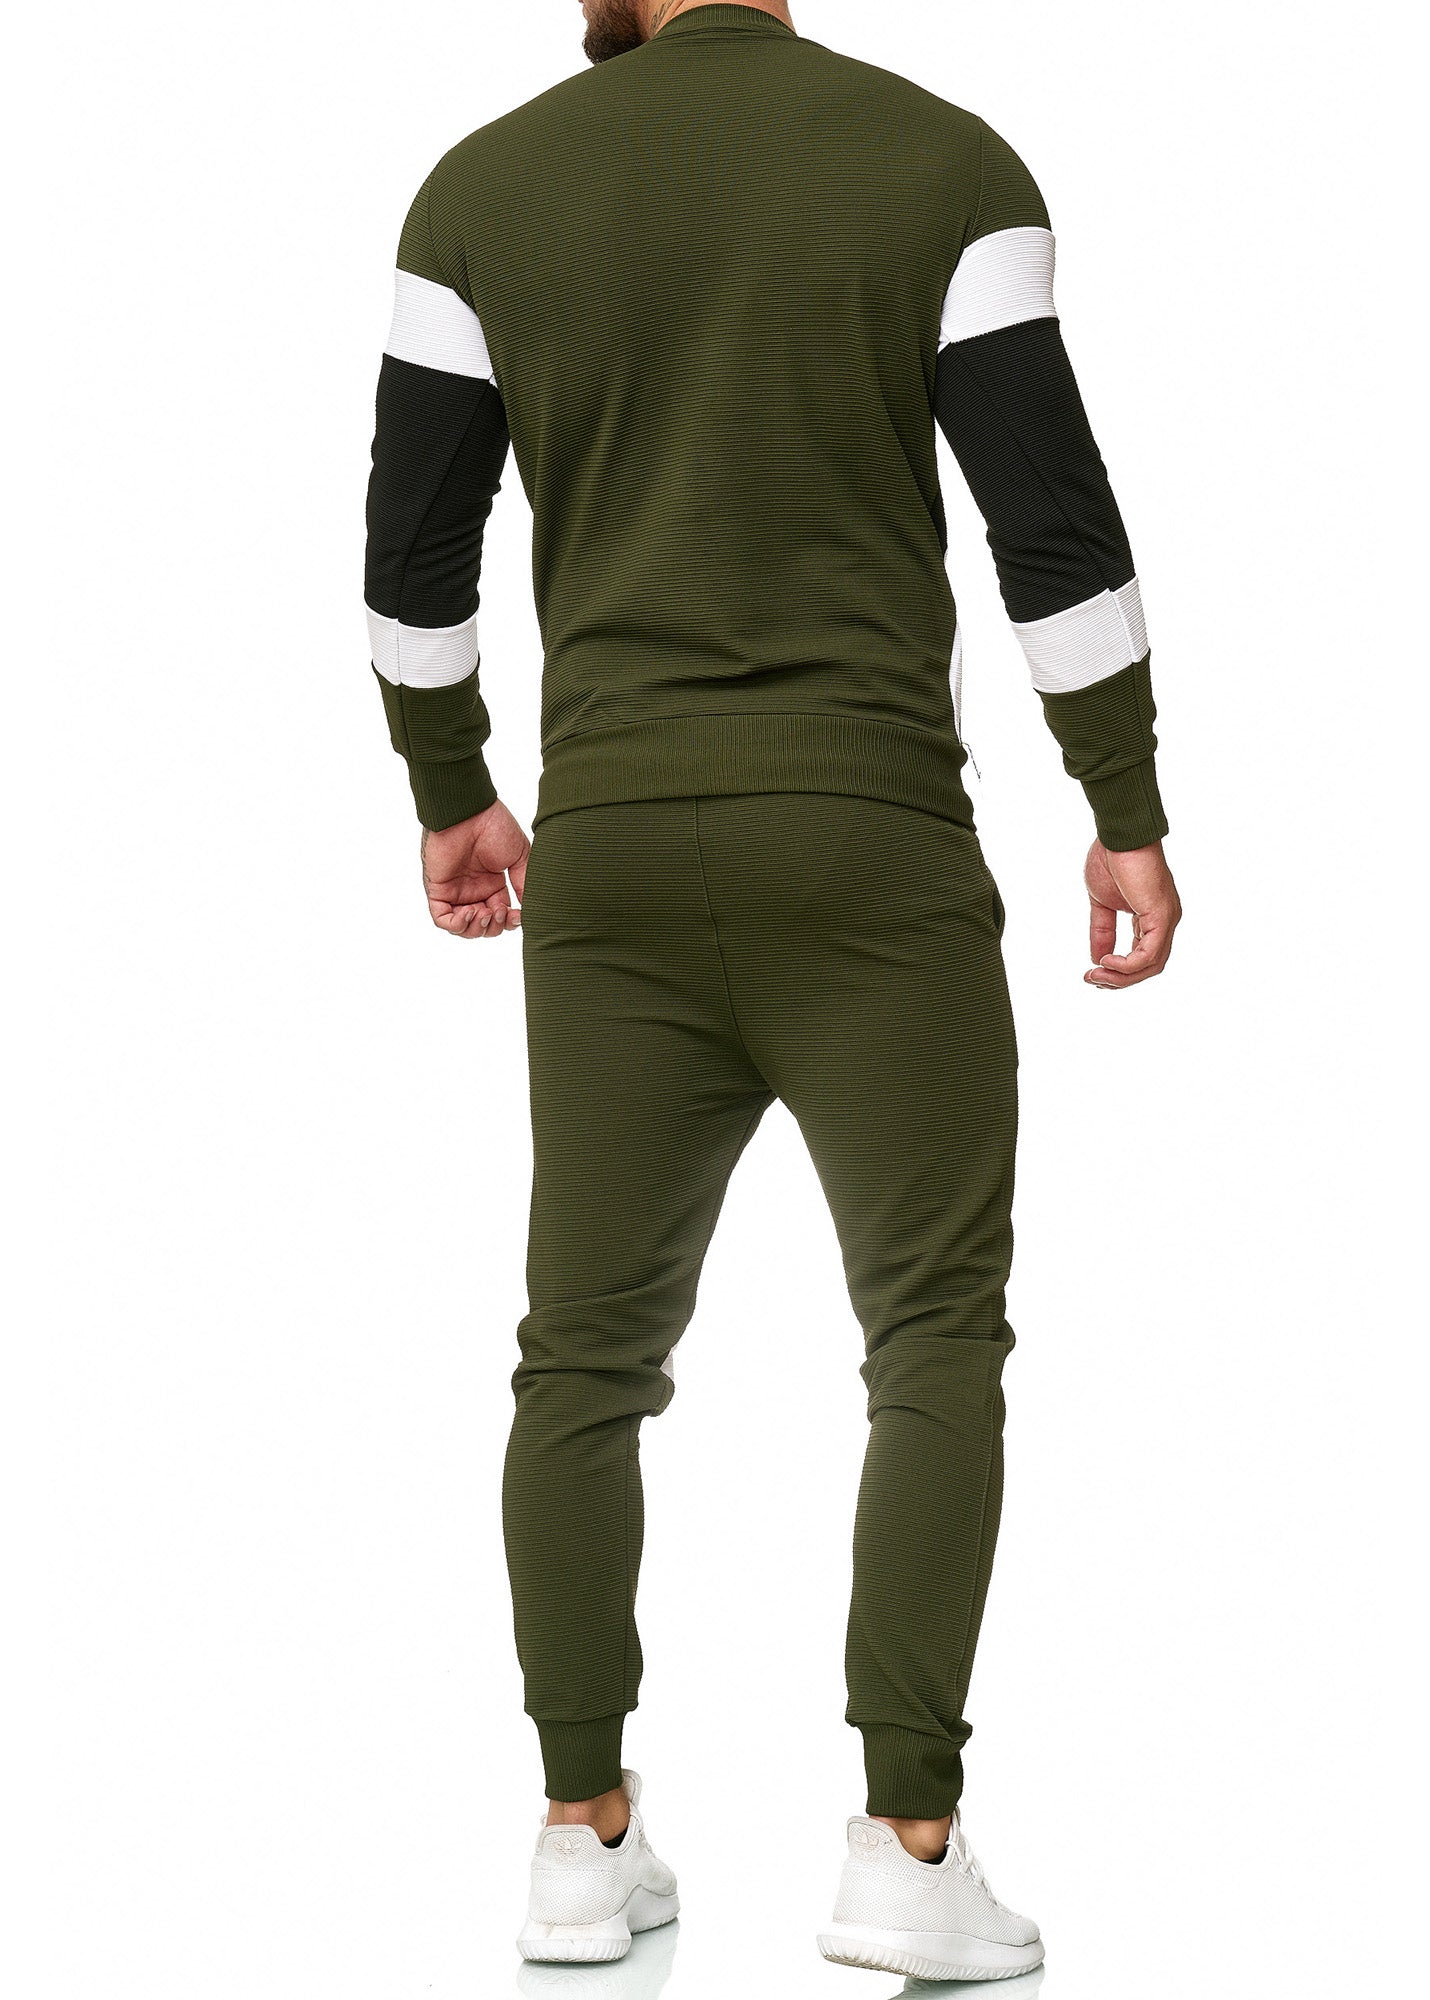 Sizag TrackSuit Sweatpant Sweater - Army Green X0020F - FASH STOP